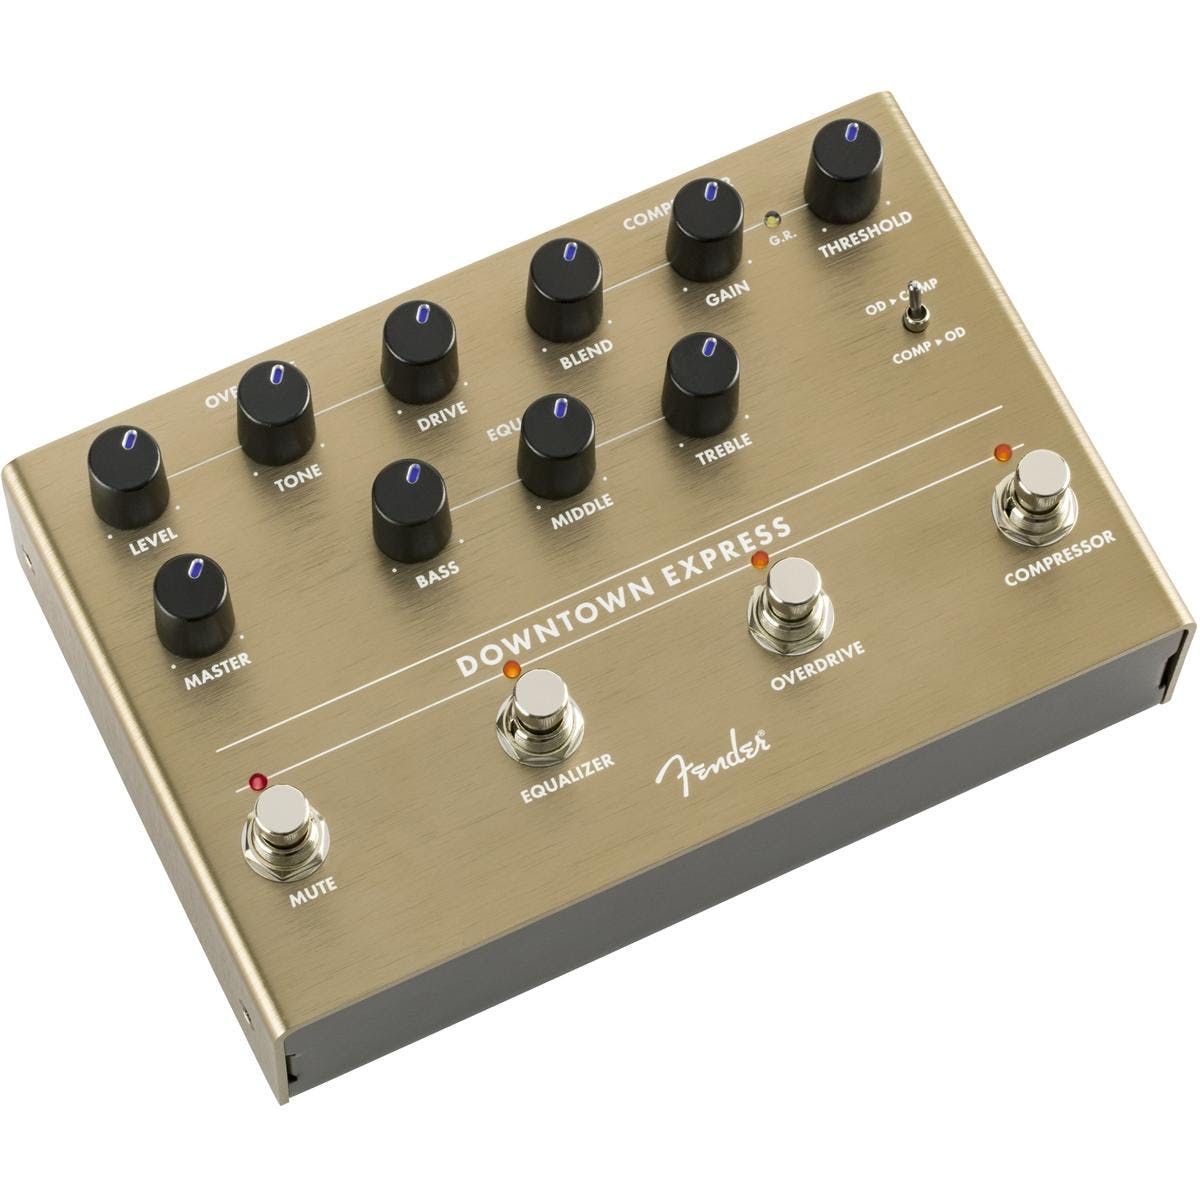 Fender Downtown Express Bass Multi Effects Pedal with Compressor 3-Band EQ Overdrive Mute Switch for Electric Guitar